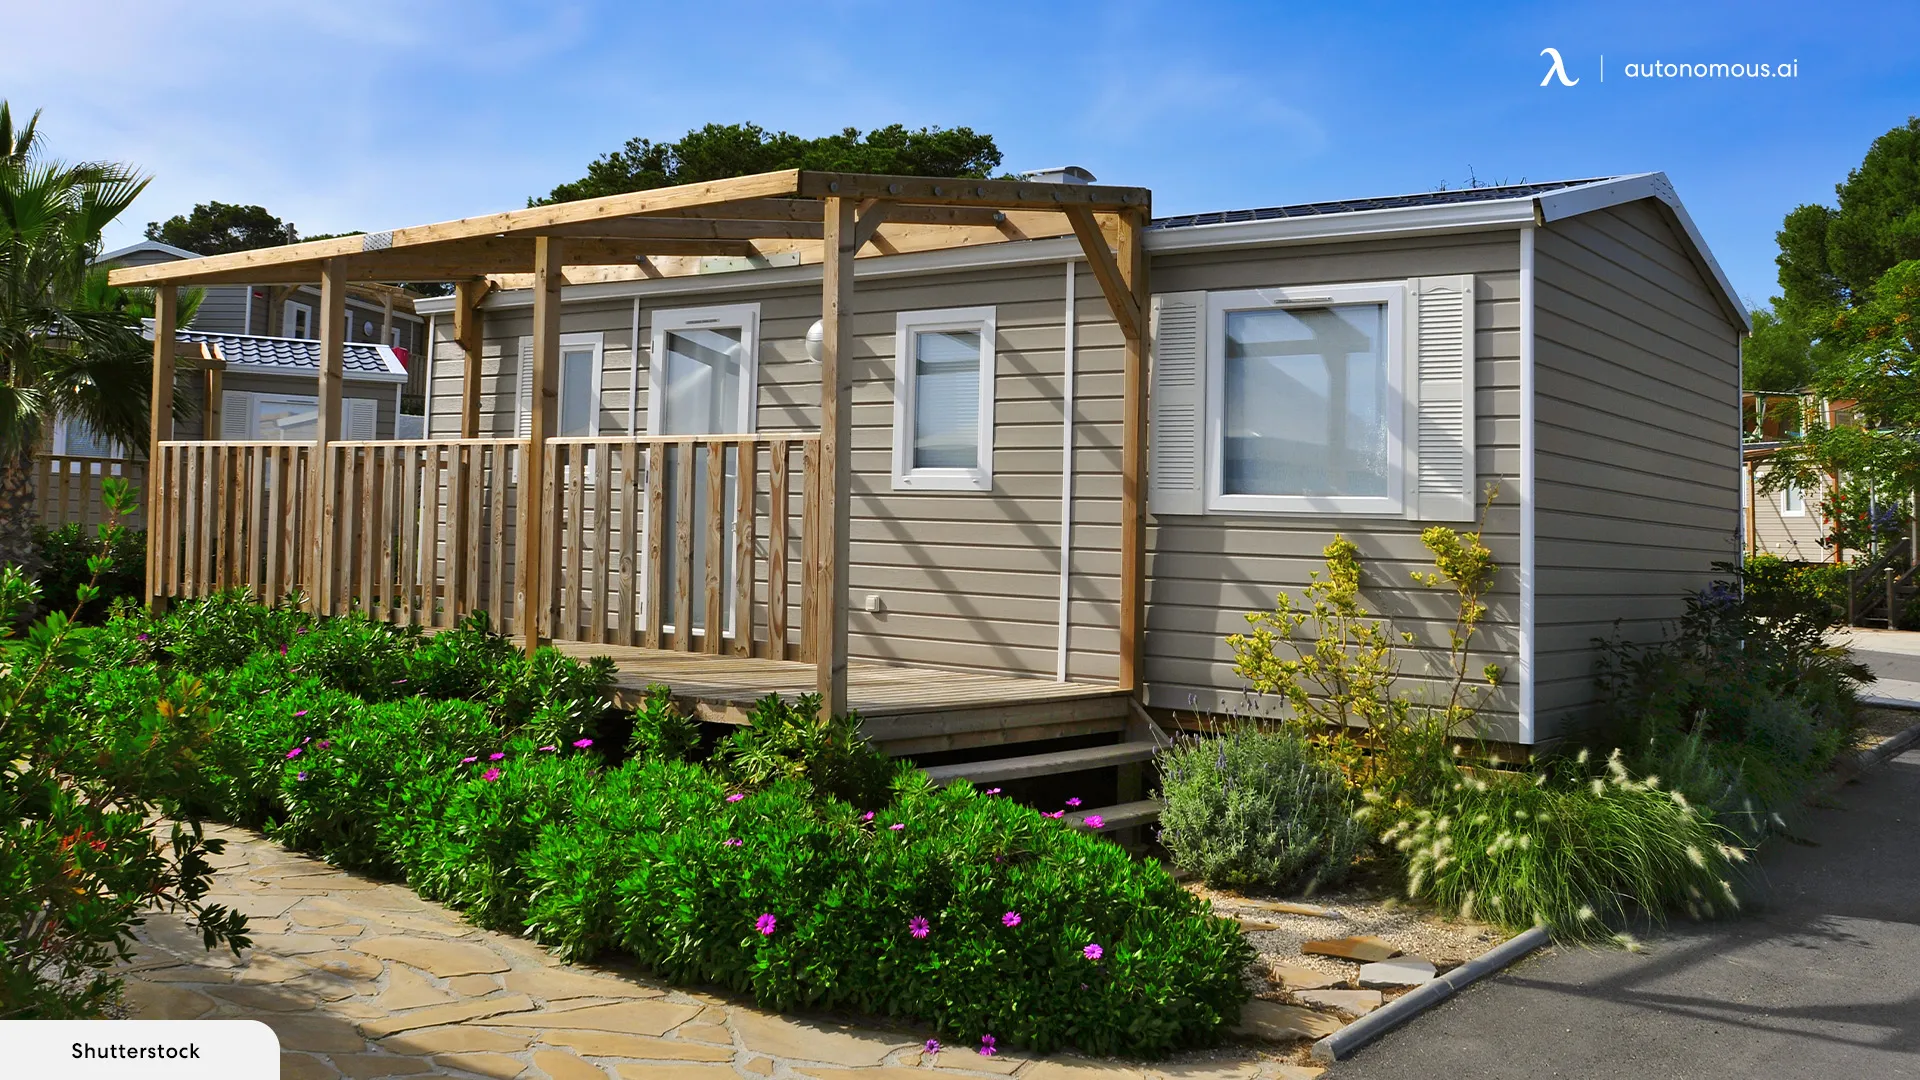 What Are the Factors That Determine If You Can Have a Tiny Home in Miami?